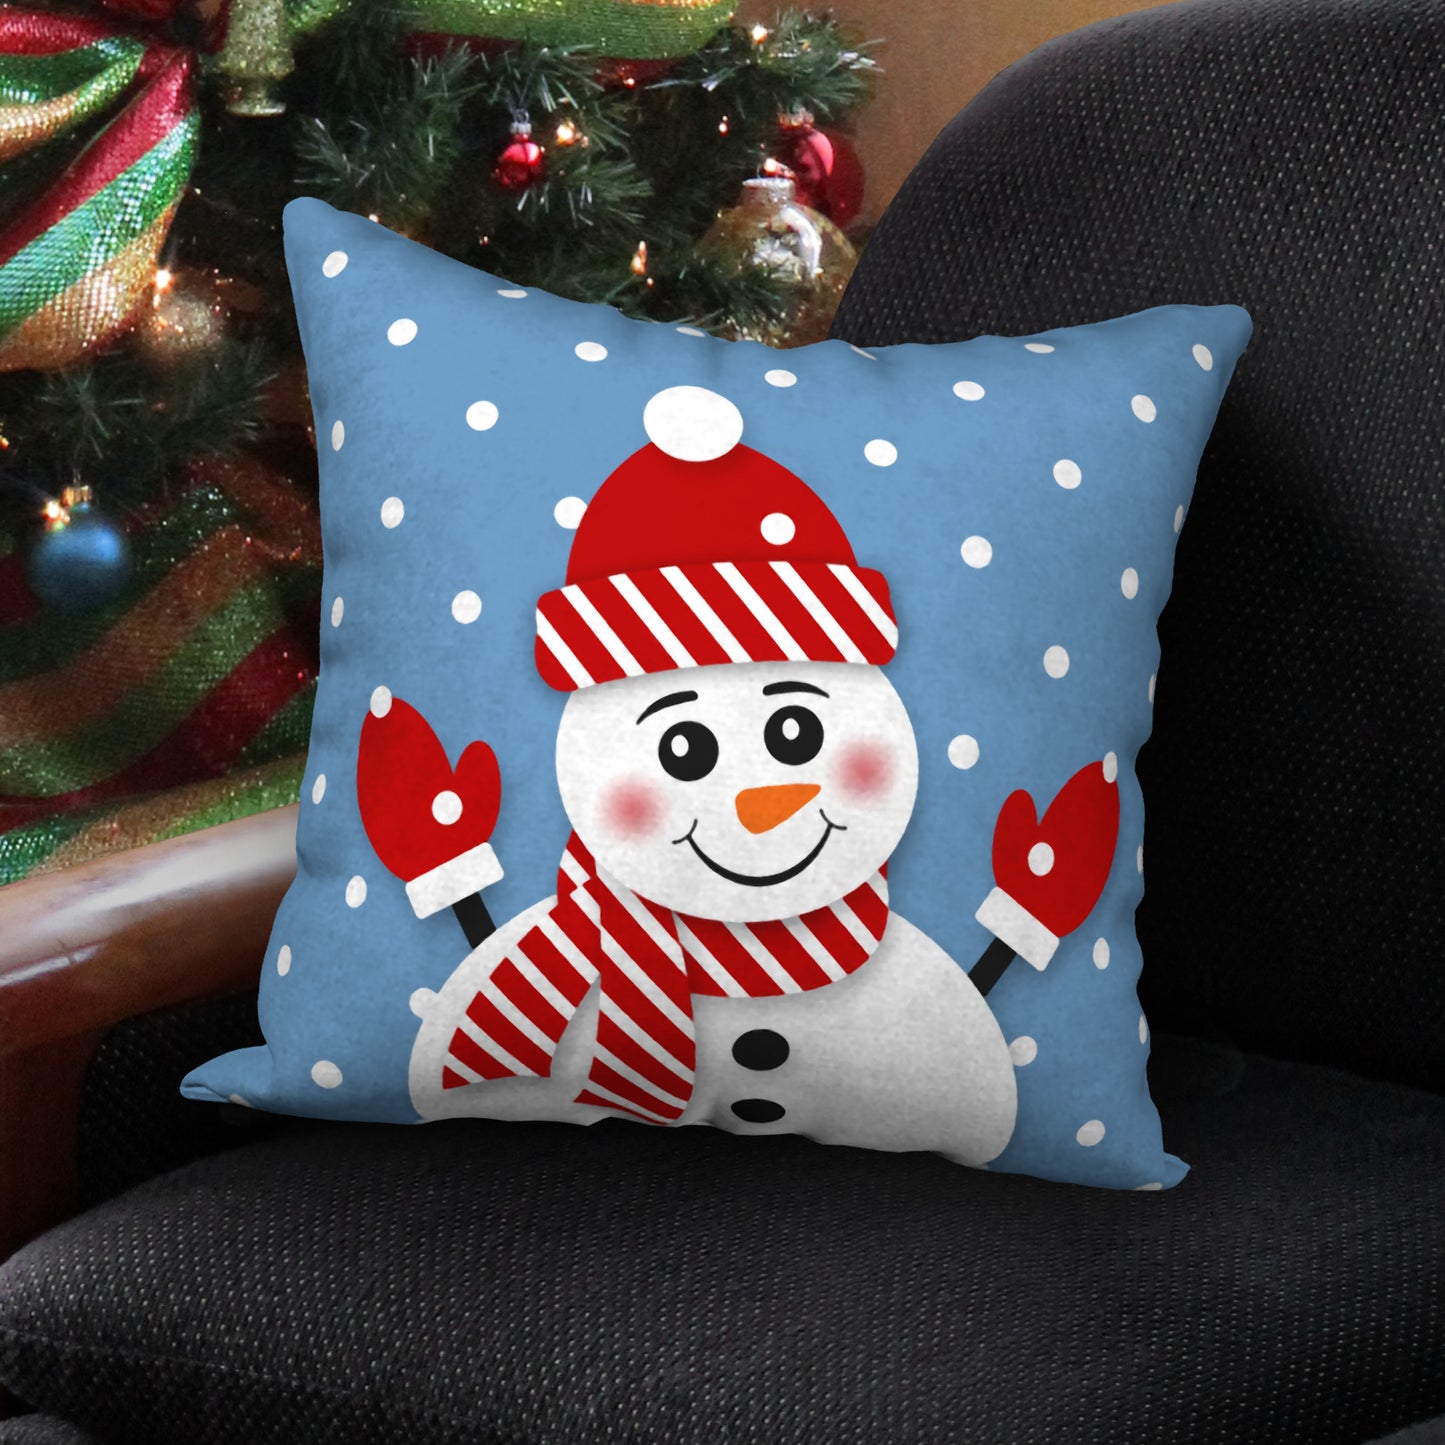 Red Hat Snowman Designer Holiday Pillow, 18"x18"